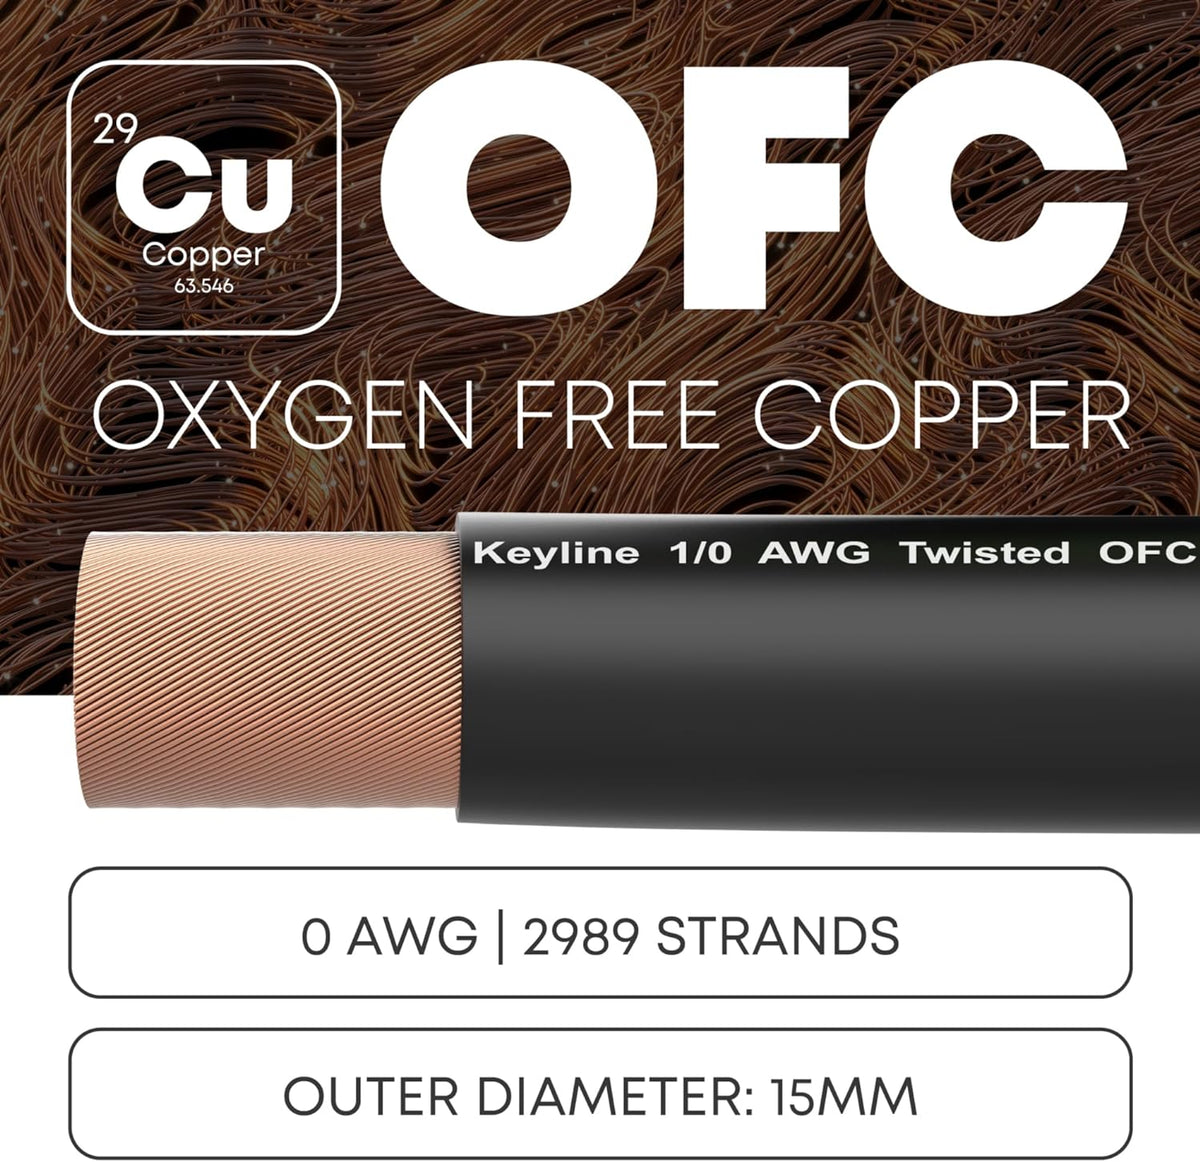 OFC Black 1/0 AWG Gauge Wire Oxygen Free Copper - (25ft), Automotive Wire, Power/Ground, Battery Cable, True Spec Welding & Automotive, Car Audio Speaker, RV Trailer, Amp Wiring by Keyline Chargers